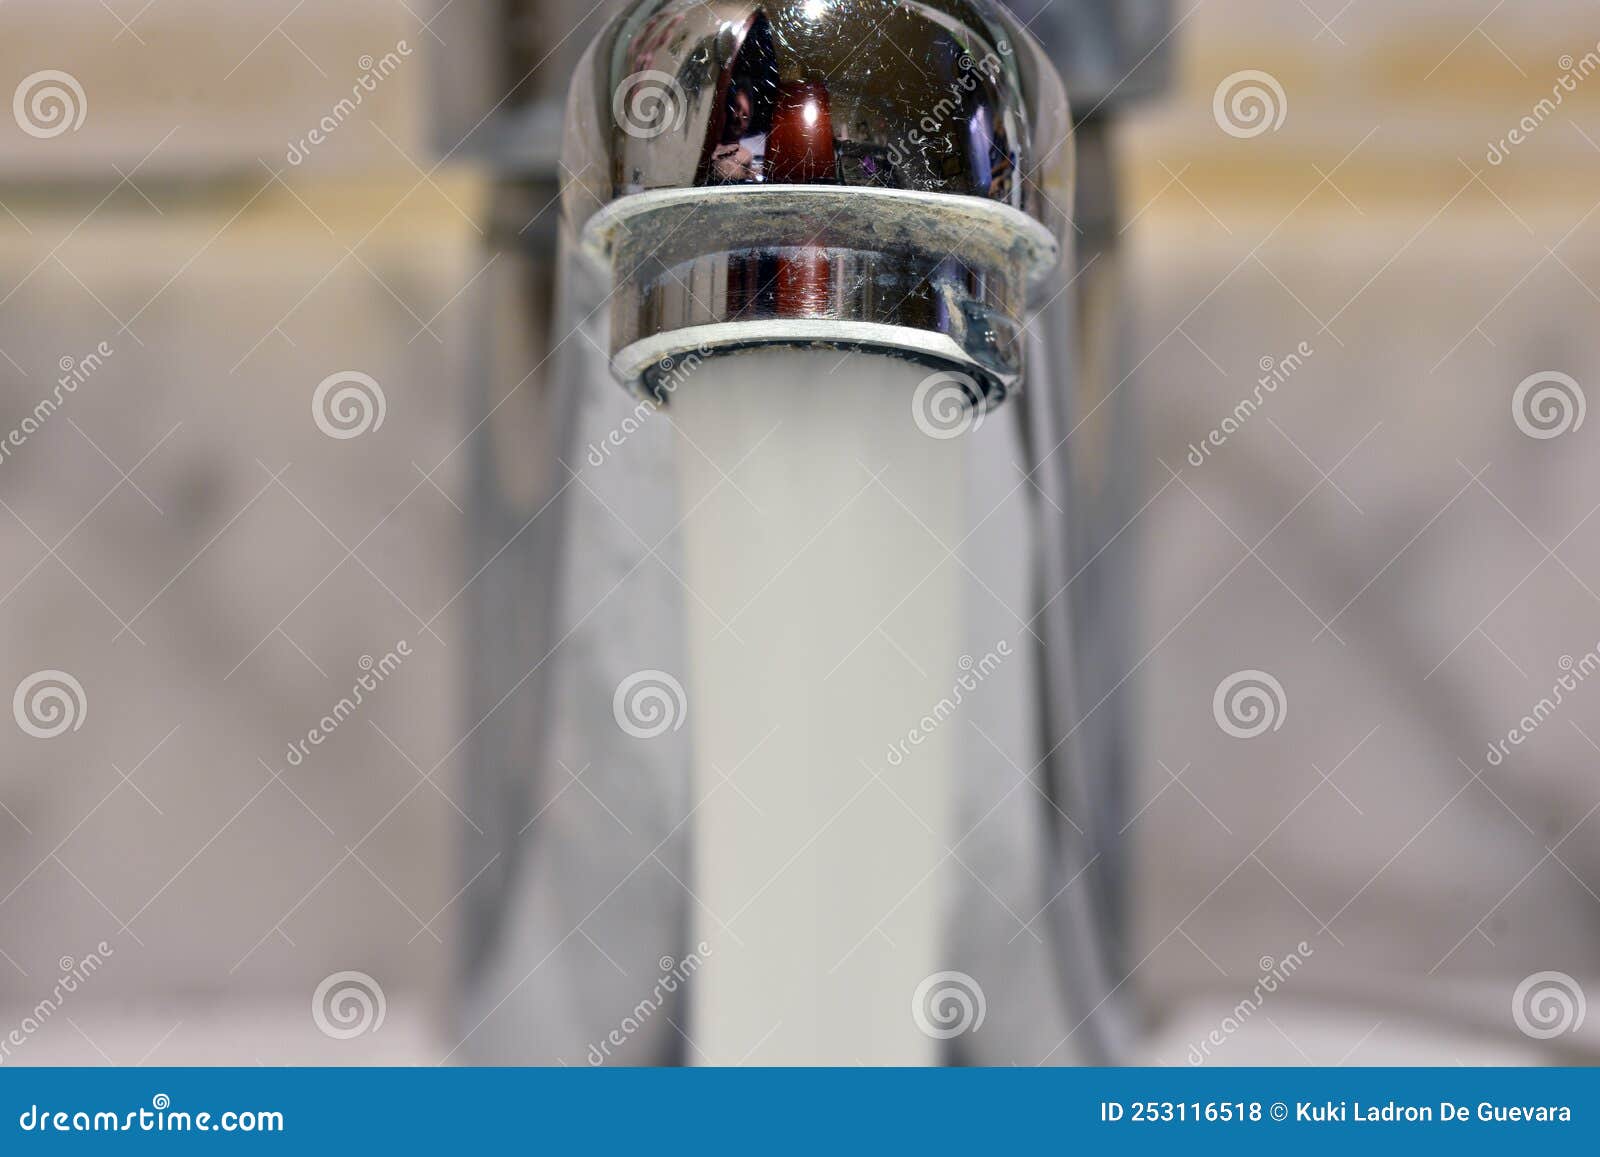 stream of water falling from a faucet in a sink